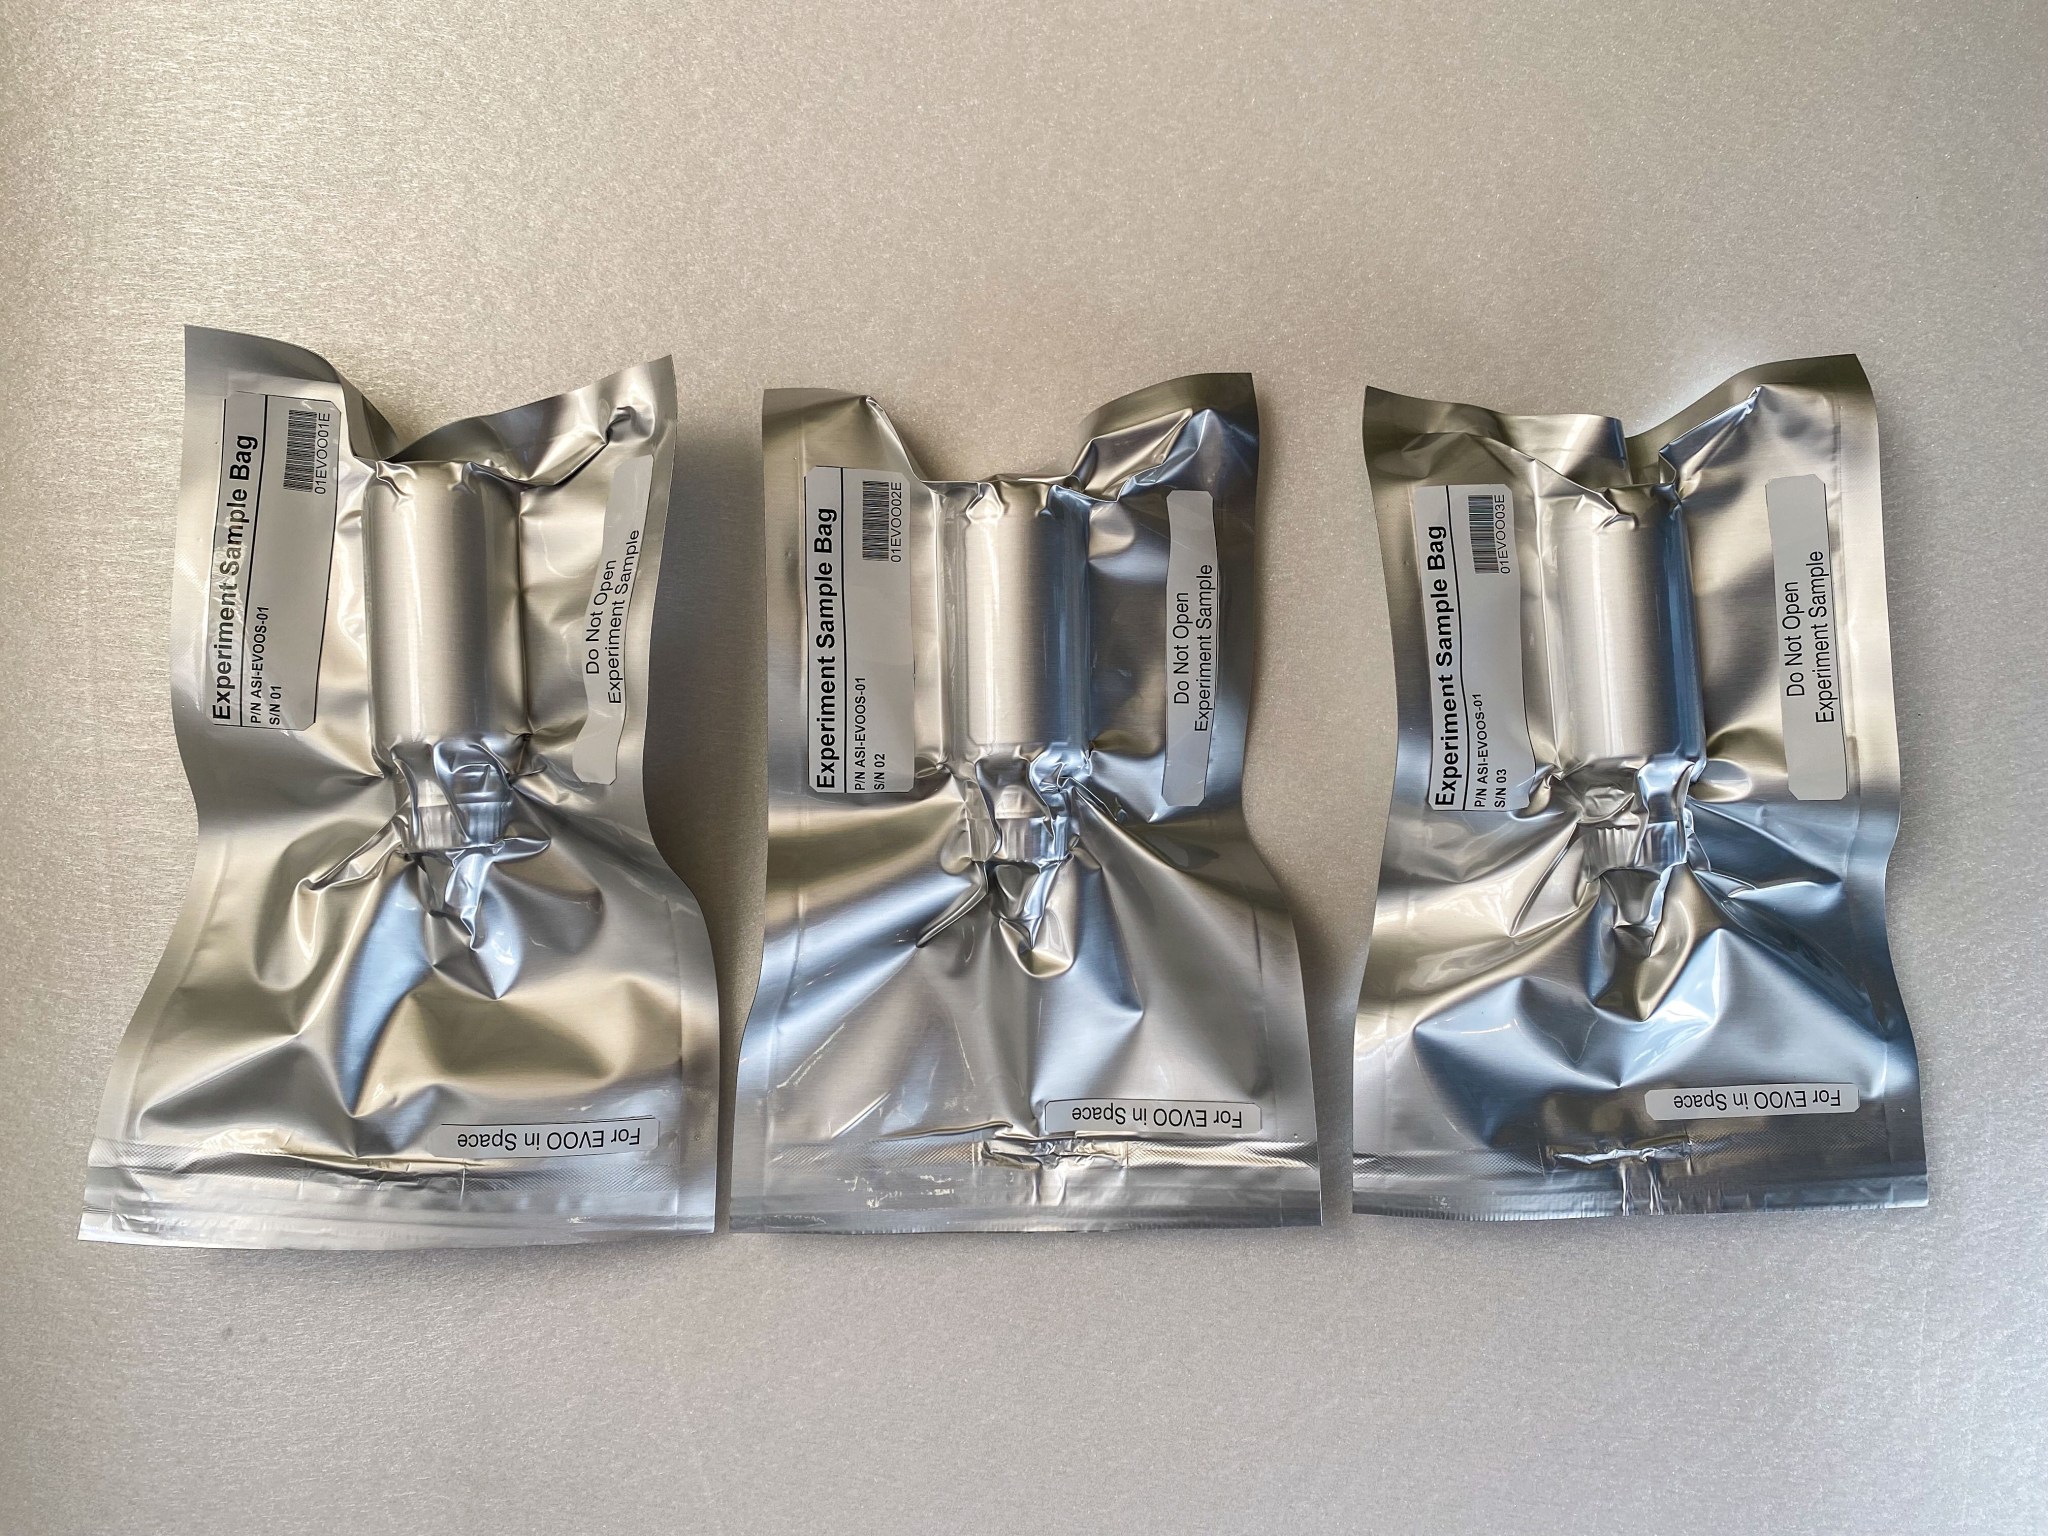 image of packaged olive oil samples for experiment